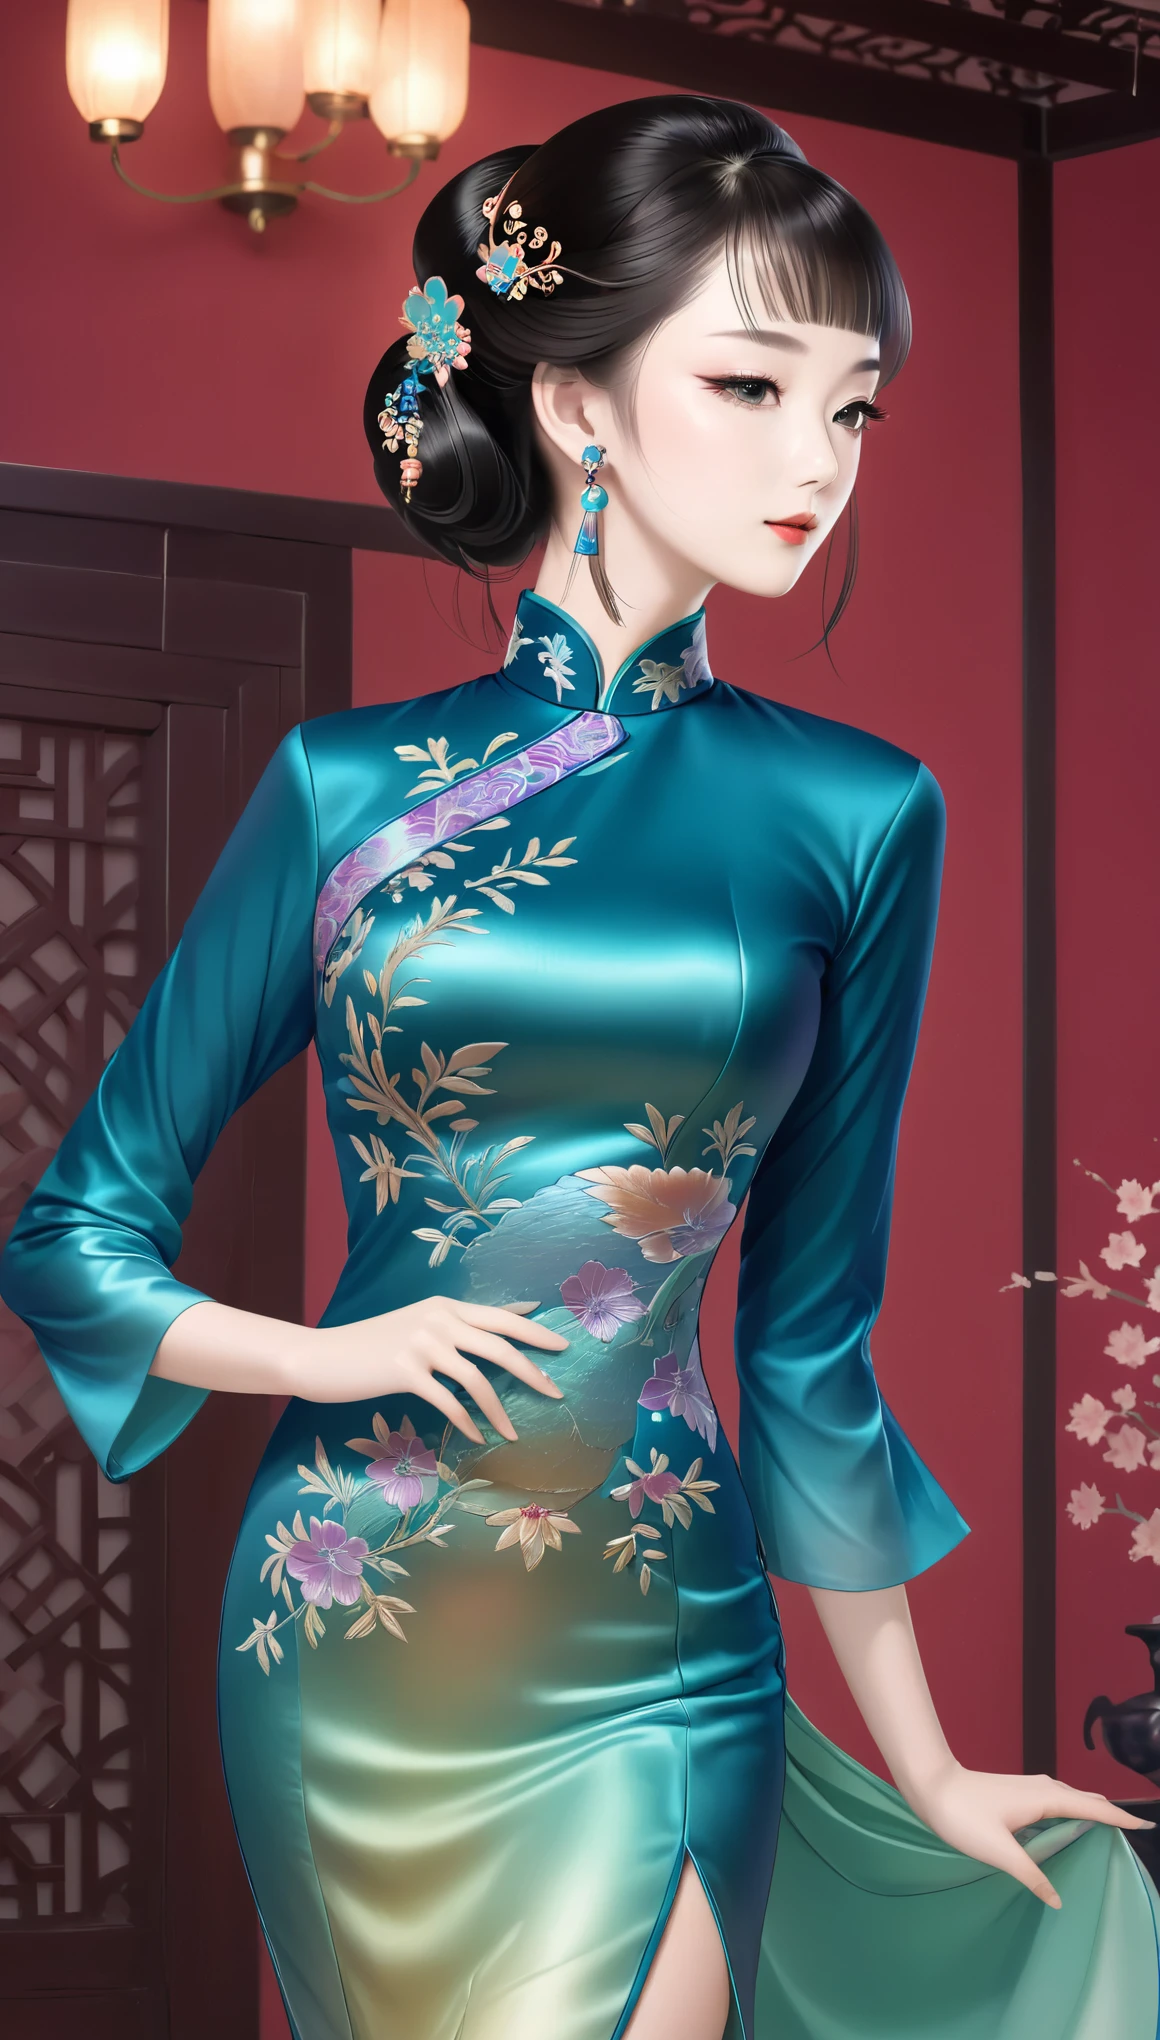 best quality, incredibly absurdres, extremely detailed, 2.5D, delicate and dynamic, beautiful woman, intelligent cool beauty, captivating look, tight up hair, wearing iridescent gradient sleeved cheongsam features intricate and luxurious embroidery, shiny satin fabric, accessories, superlative body proportion, gorgeous and gorgeous effects, background aristocratic social setting